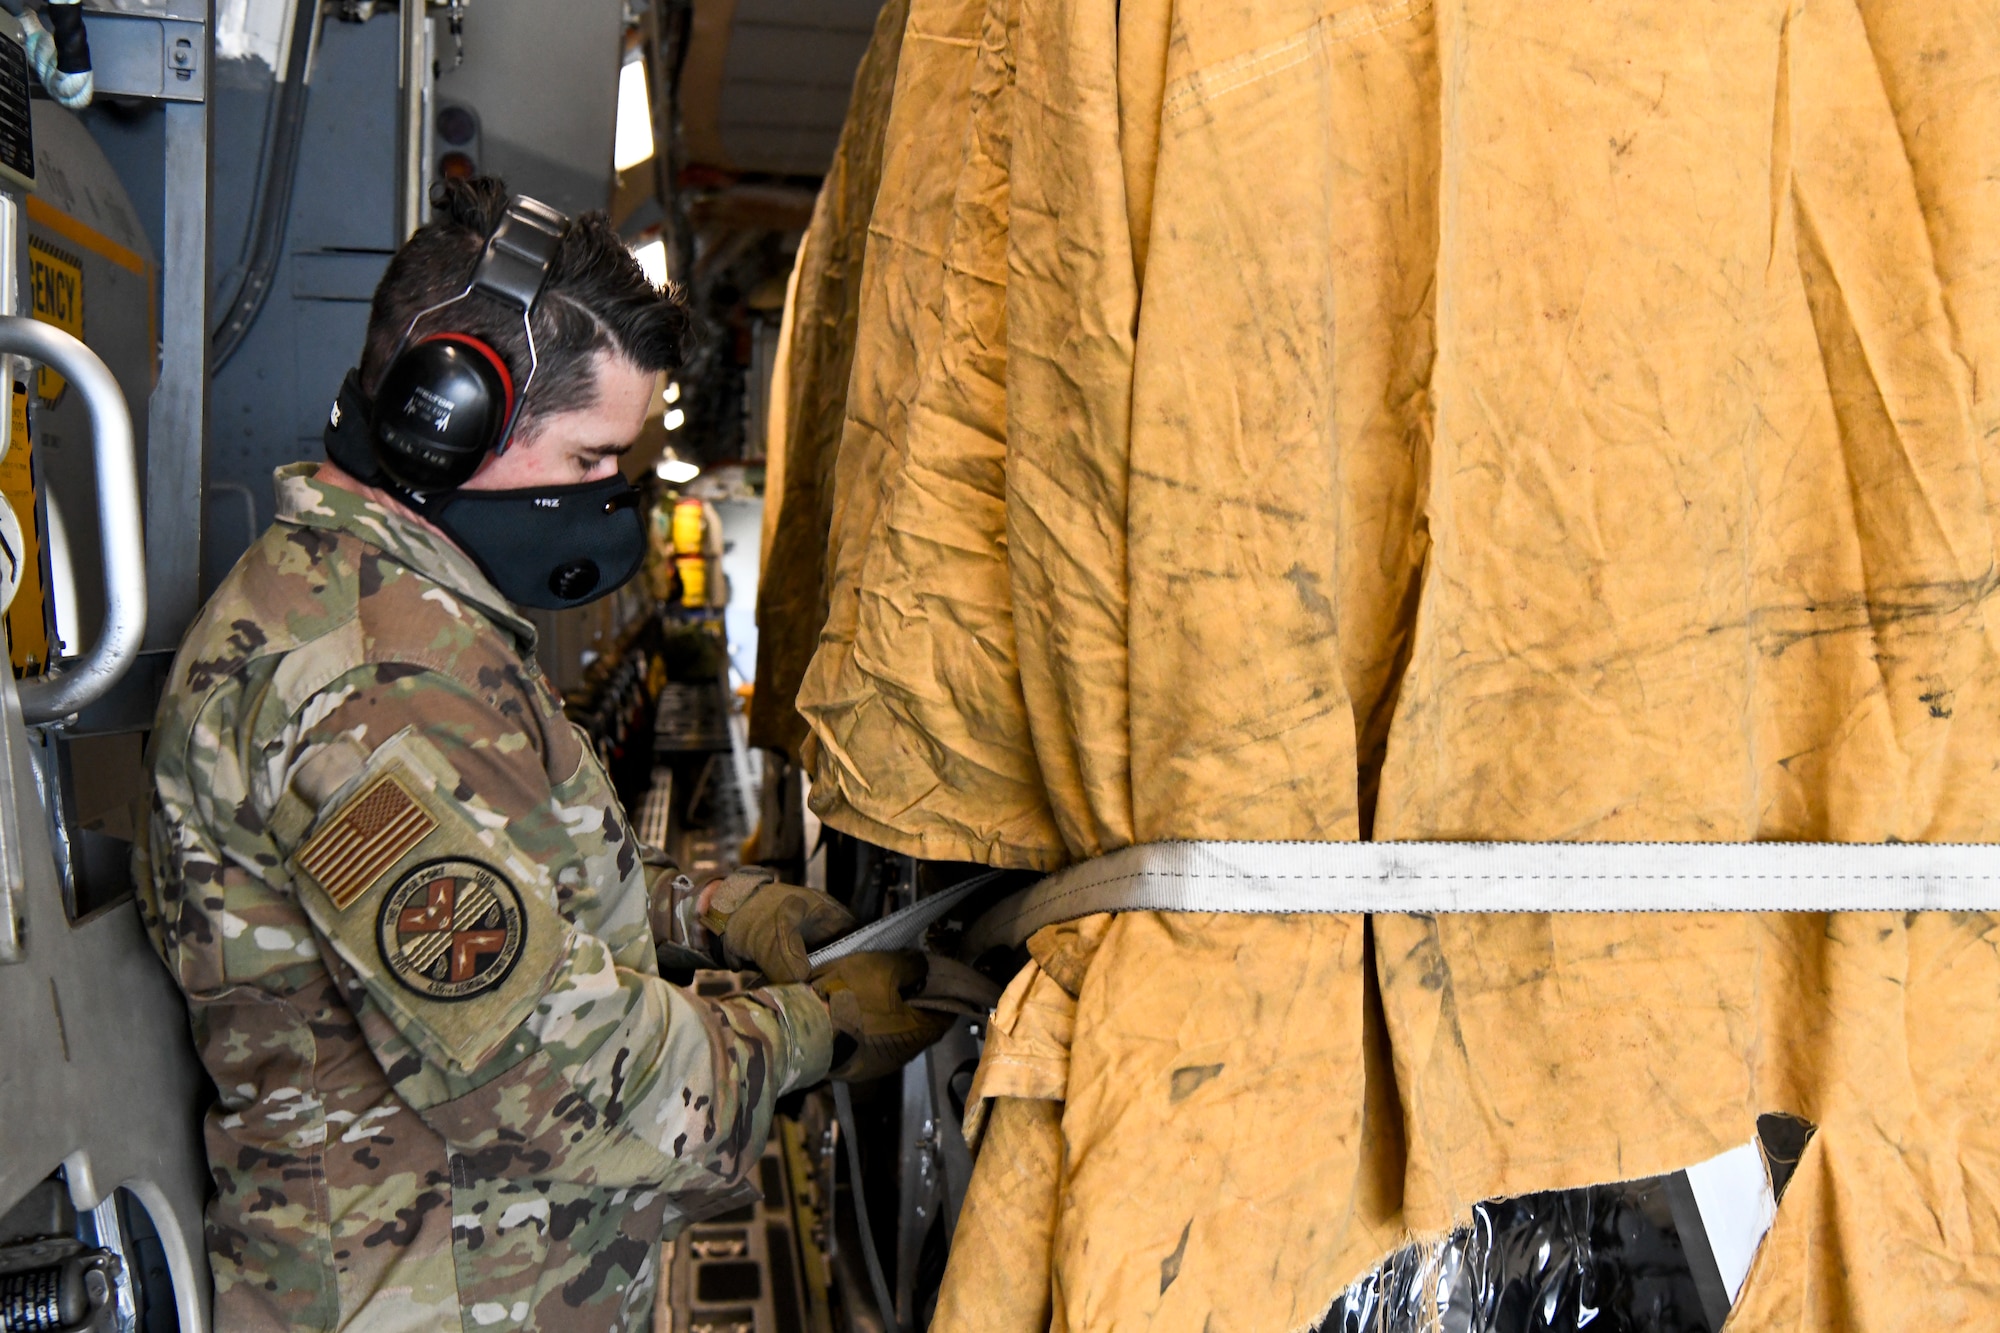 Senior Master Sgt. Andrew Silkworth, 436th Aerial Port Squadron airfreight superintendent, tightens a cargo strap at Dover Air Force Base, Delaware, April 30, 2020. Tarps were placed on top of the Transport Isolation Systems due to inclement weather at Dover AFB. In accordance with health protection policies, Dover AFB will serve as the sole hub for TIS decontamination on the East Coast.  (U.S. Air Force photo by Senior Airman Christopher Quail)